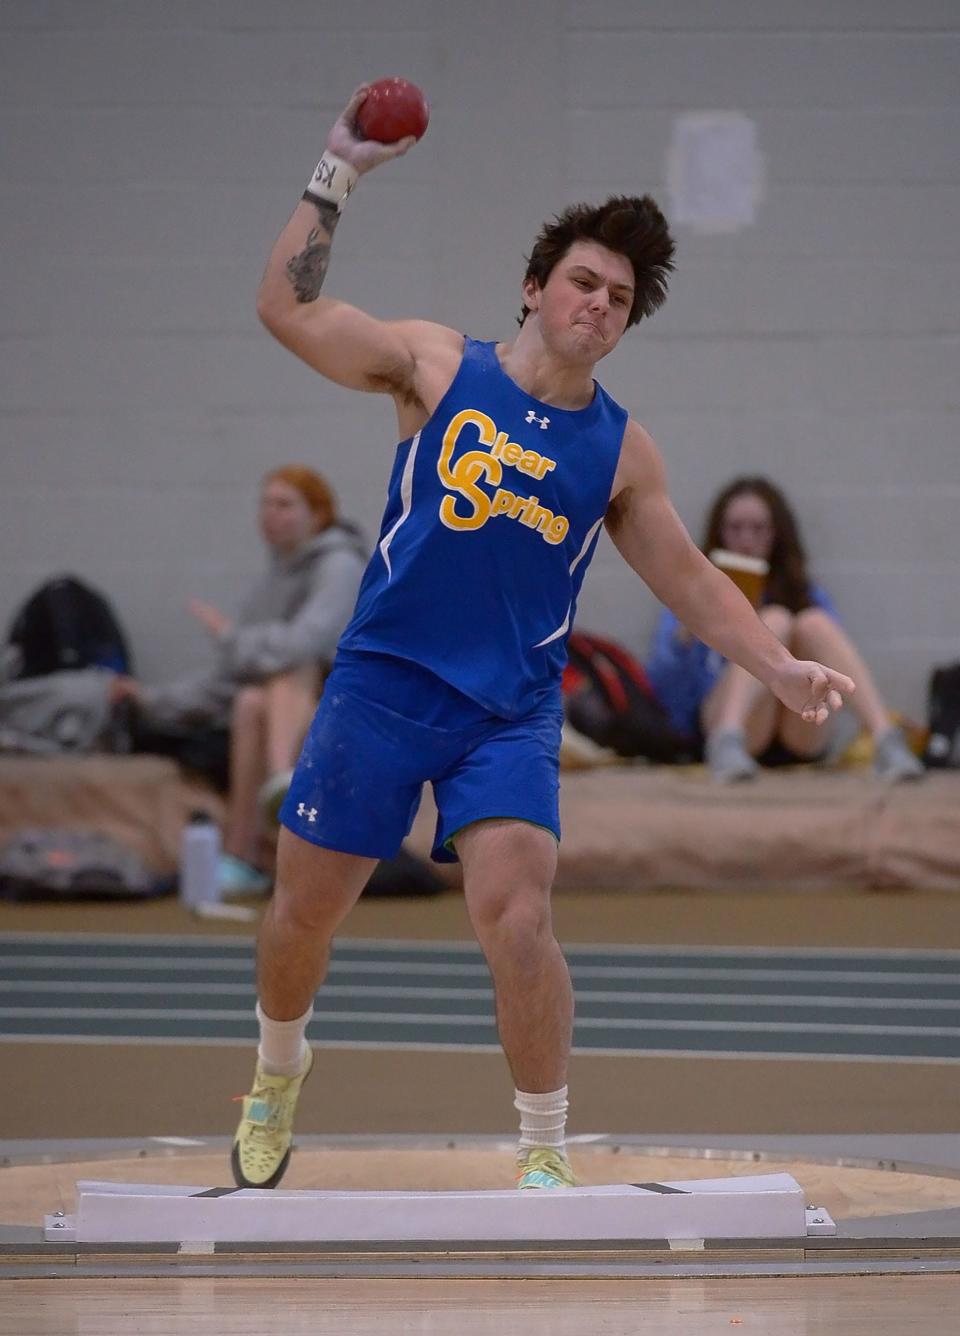 Clear Spring's Ryder Brown threw 44 feet, 1 inch to win the boys shot put during the Maryland Class 1A West Indoor Track & Field Championships on Saturday.